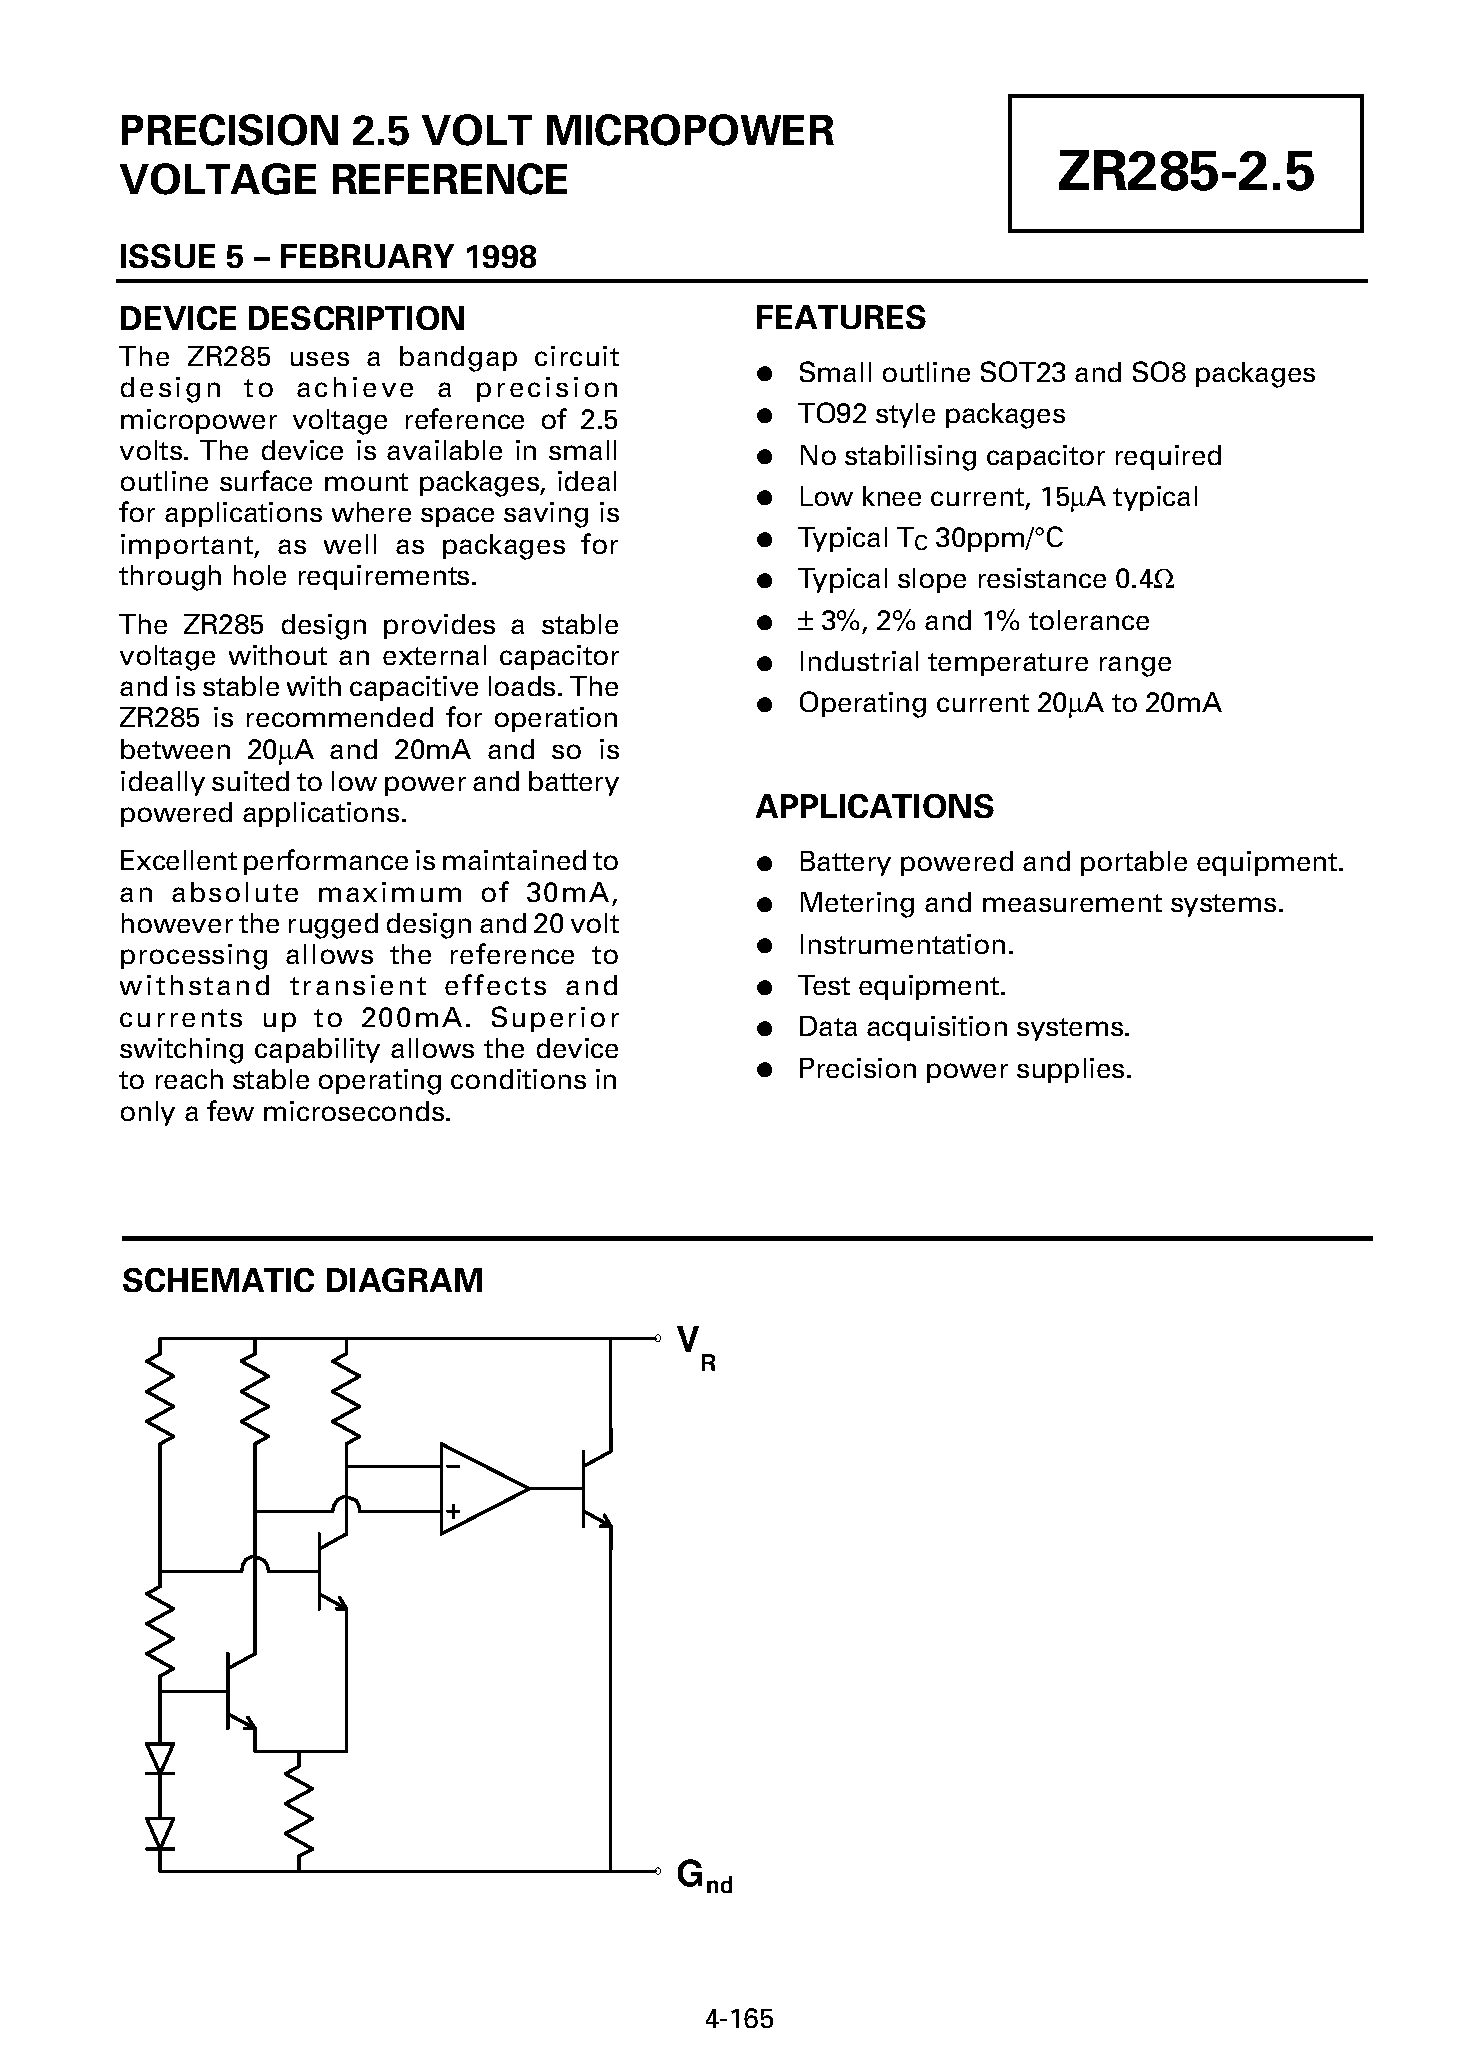 Datasheet ZR285F02 - PRECISION 2.5 VOLT MICROPOWER VOLTAGE REFERENCE page 1